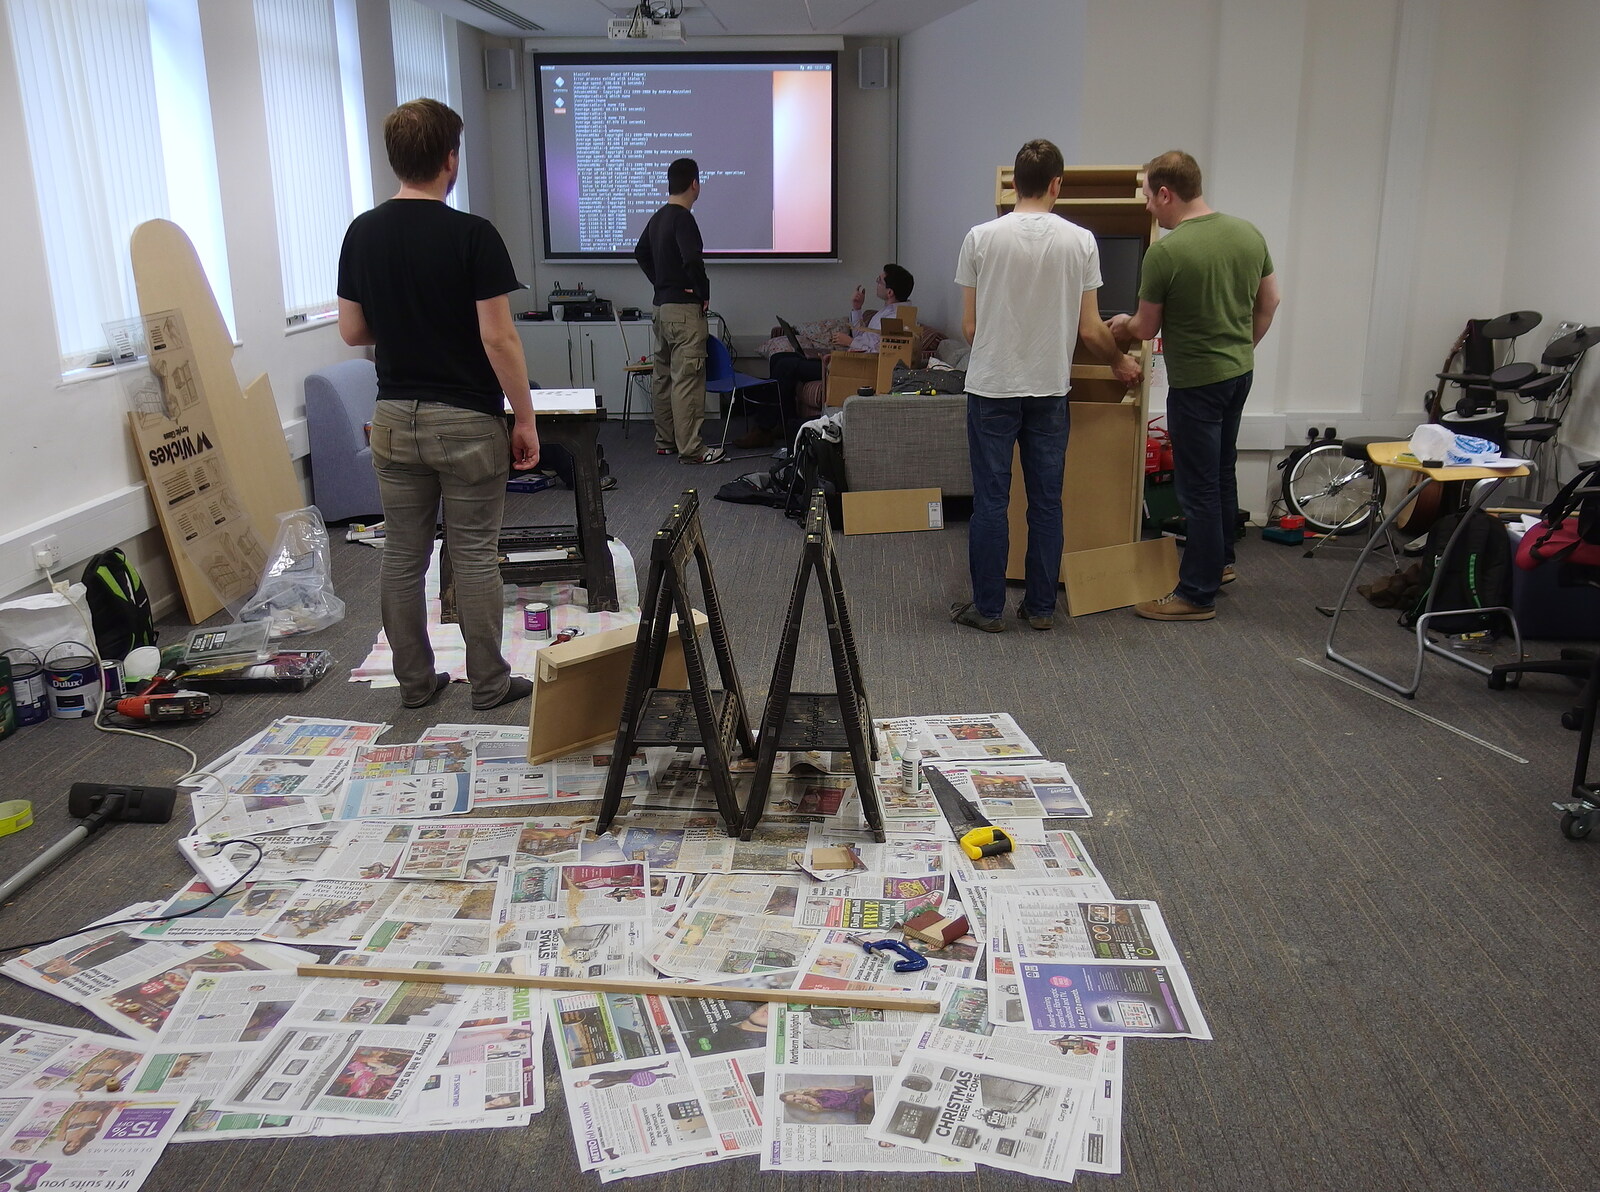 SwiftKey's Arcade Cabinet, and the Streets of Southwark, London - 5th December 2013: Newspapers are laid out for painting